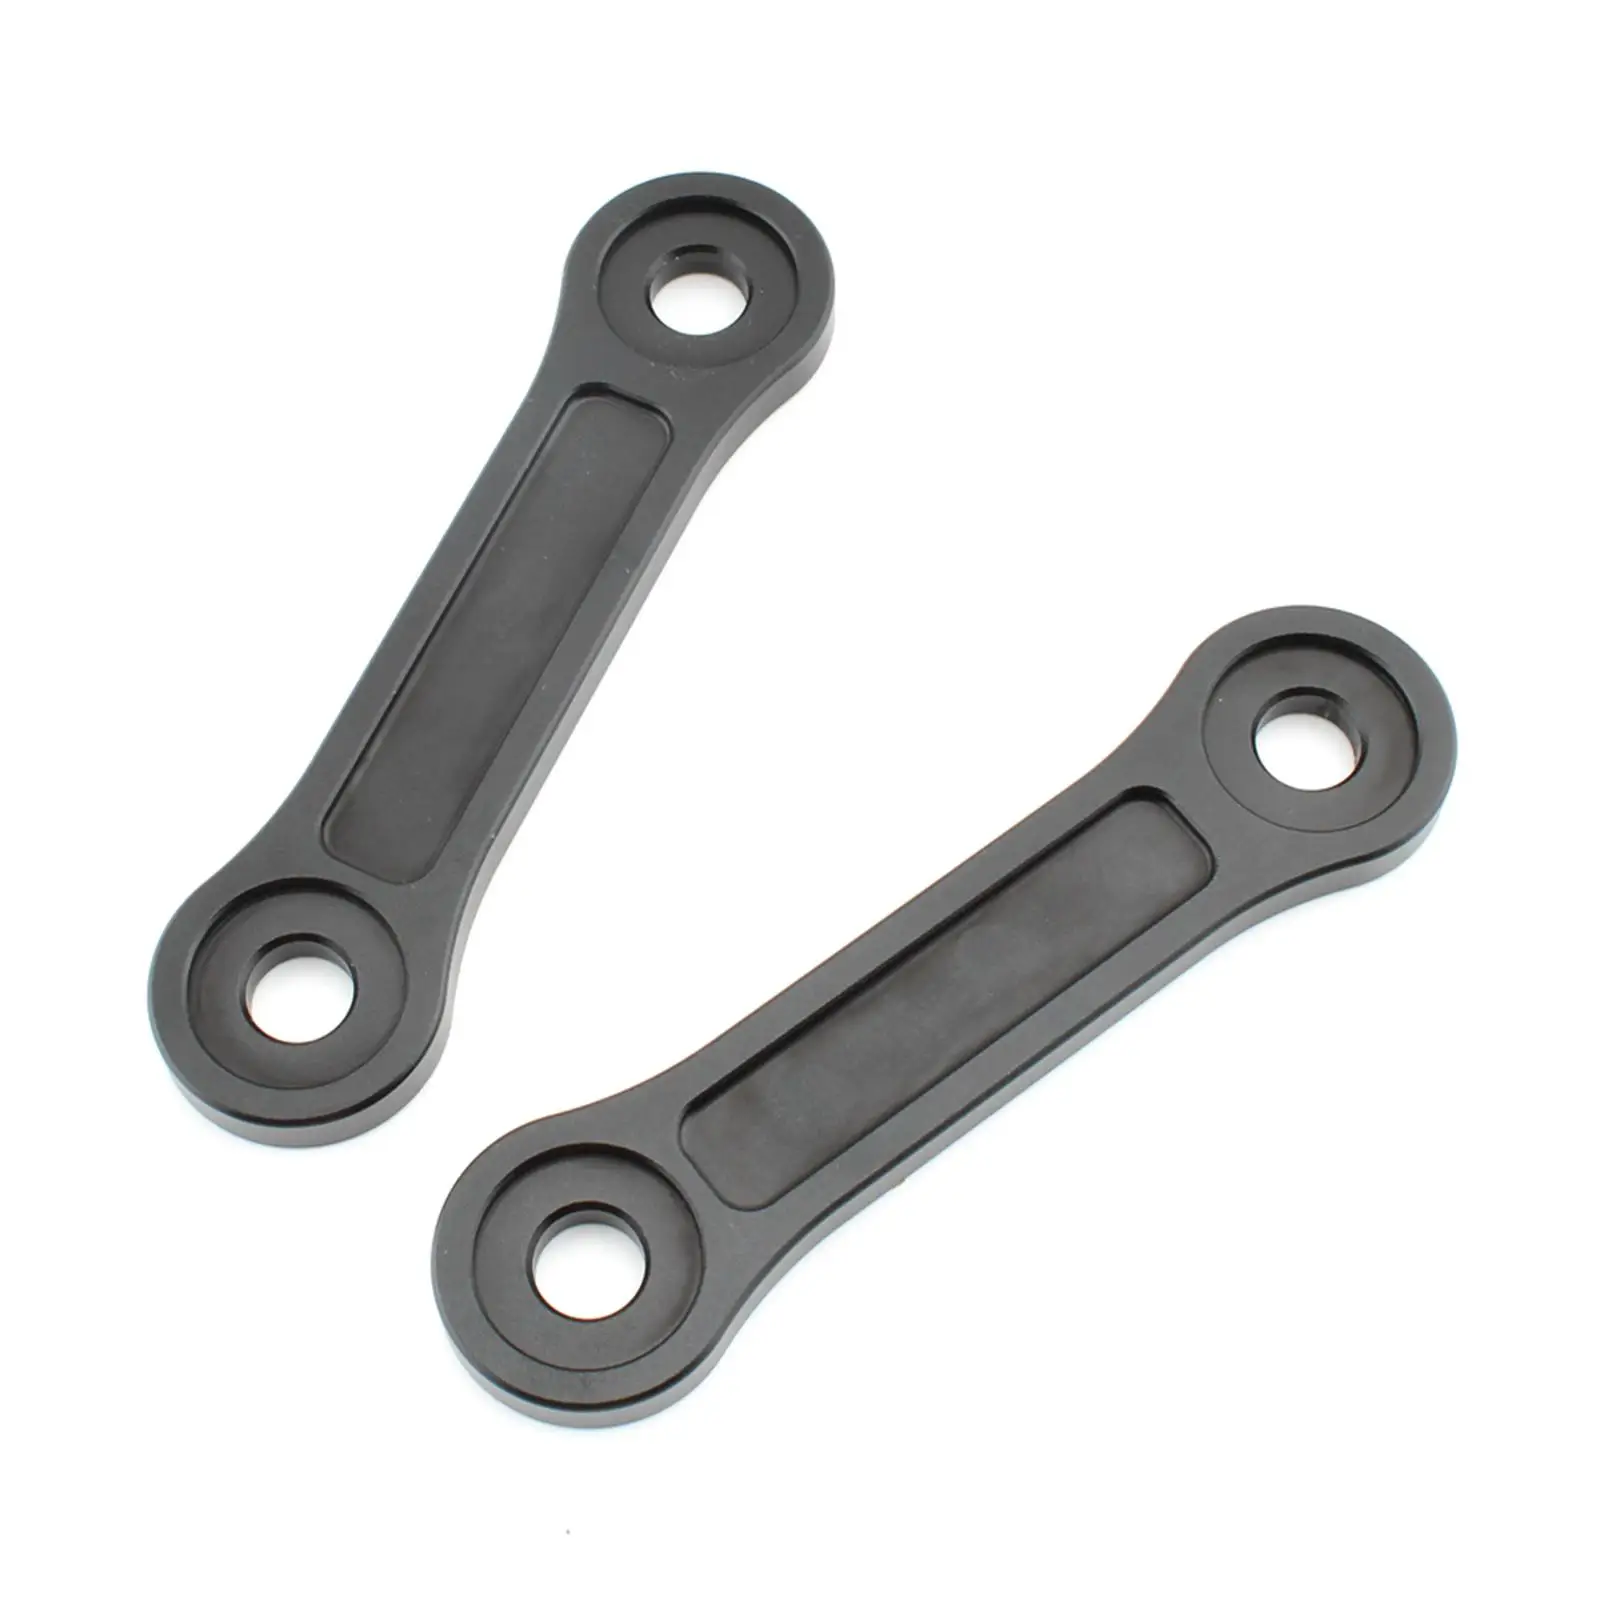 2 Pieces Motorcycle Lowering Links Kit Replaces Easy Installation Aluminium Alloy Accessories Durable 20mm for Tiger 1200